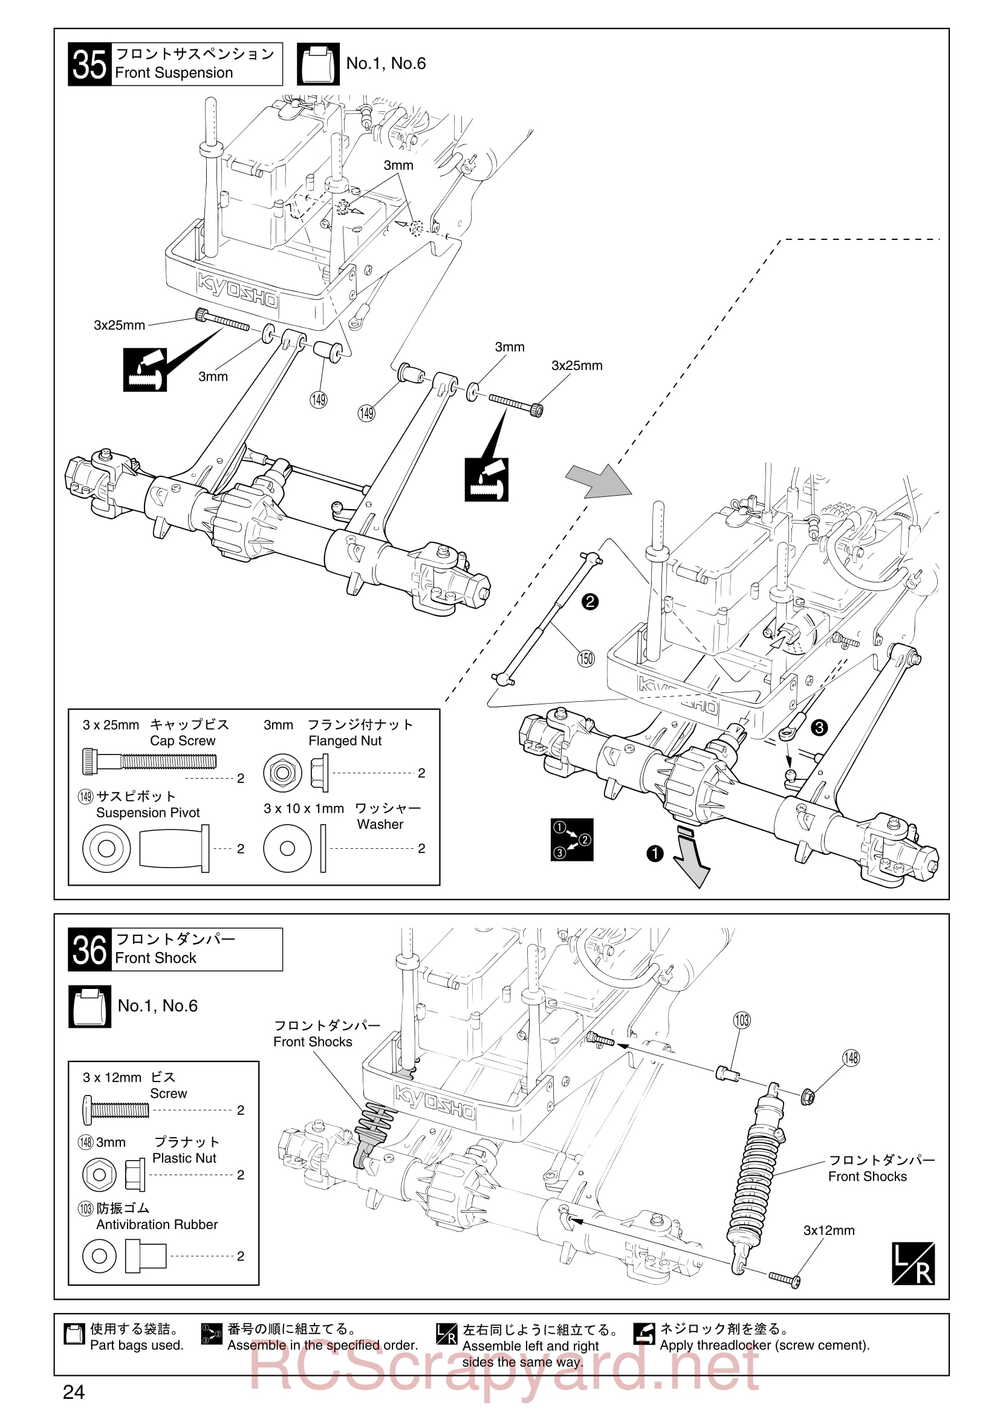 Kyosho - 31224 - Mad-Armour - Manual - Page 24